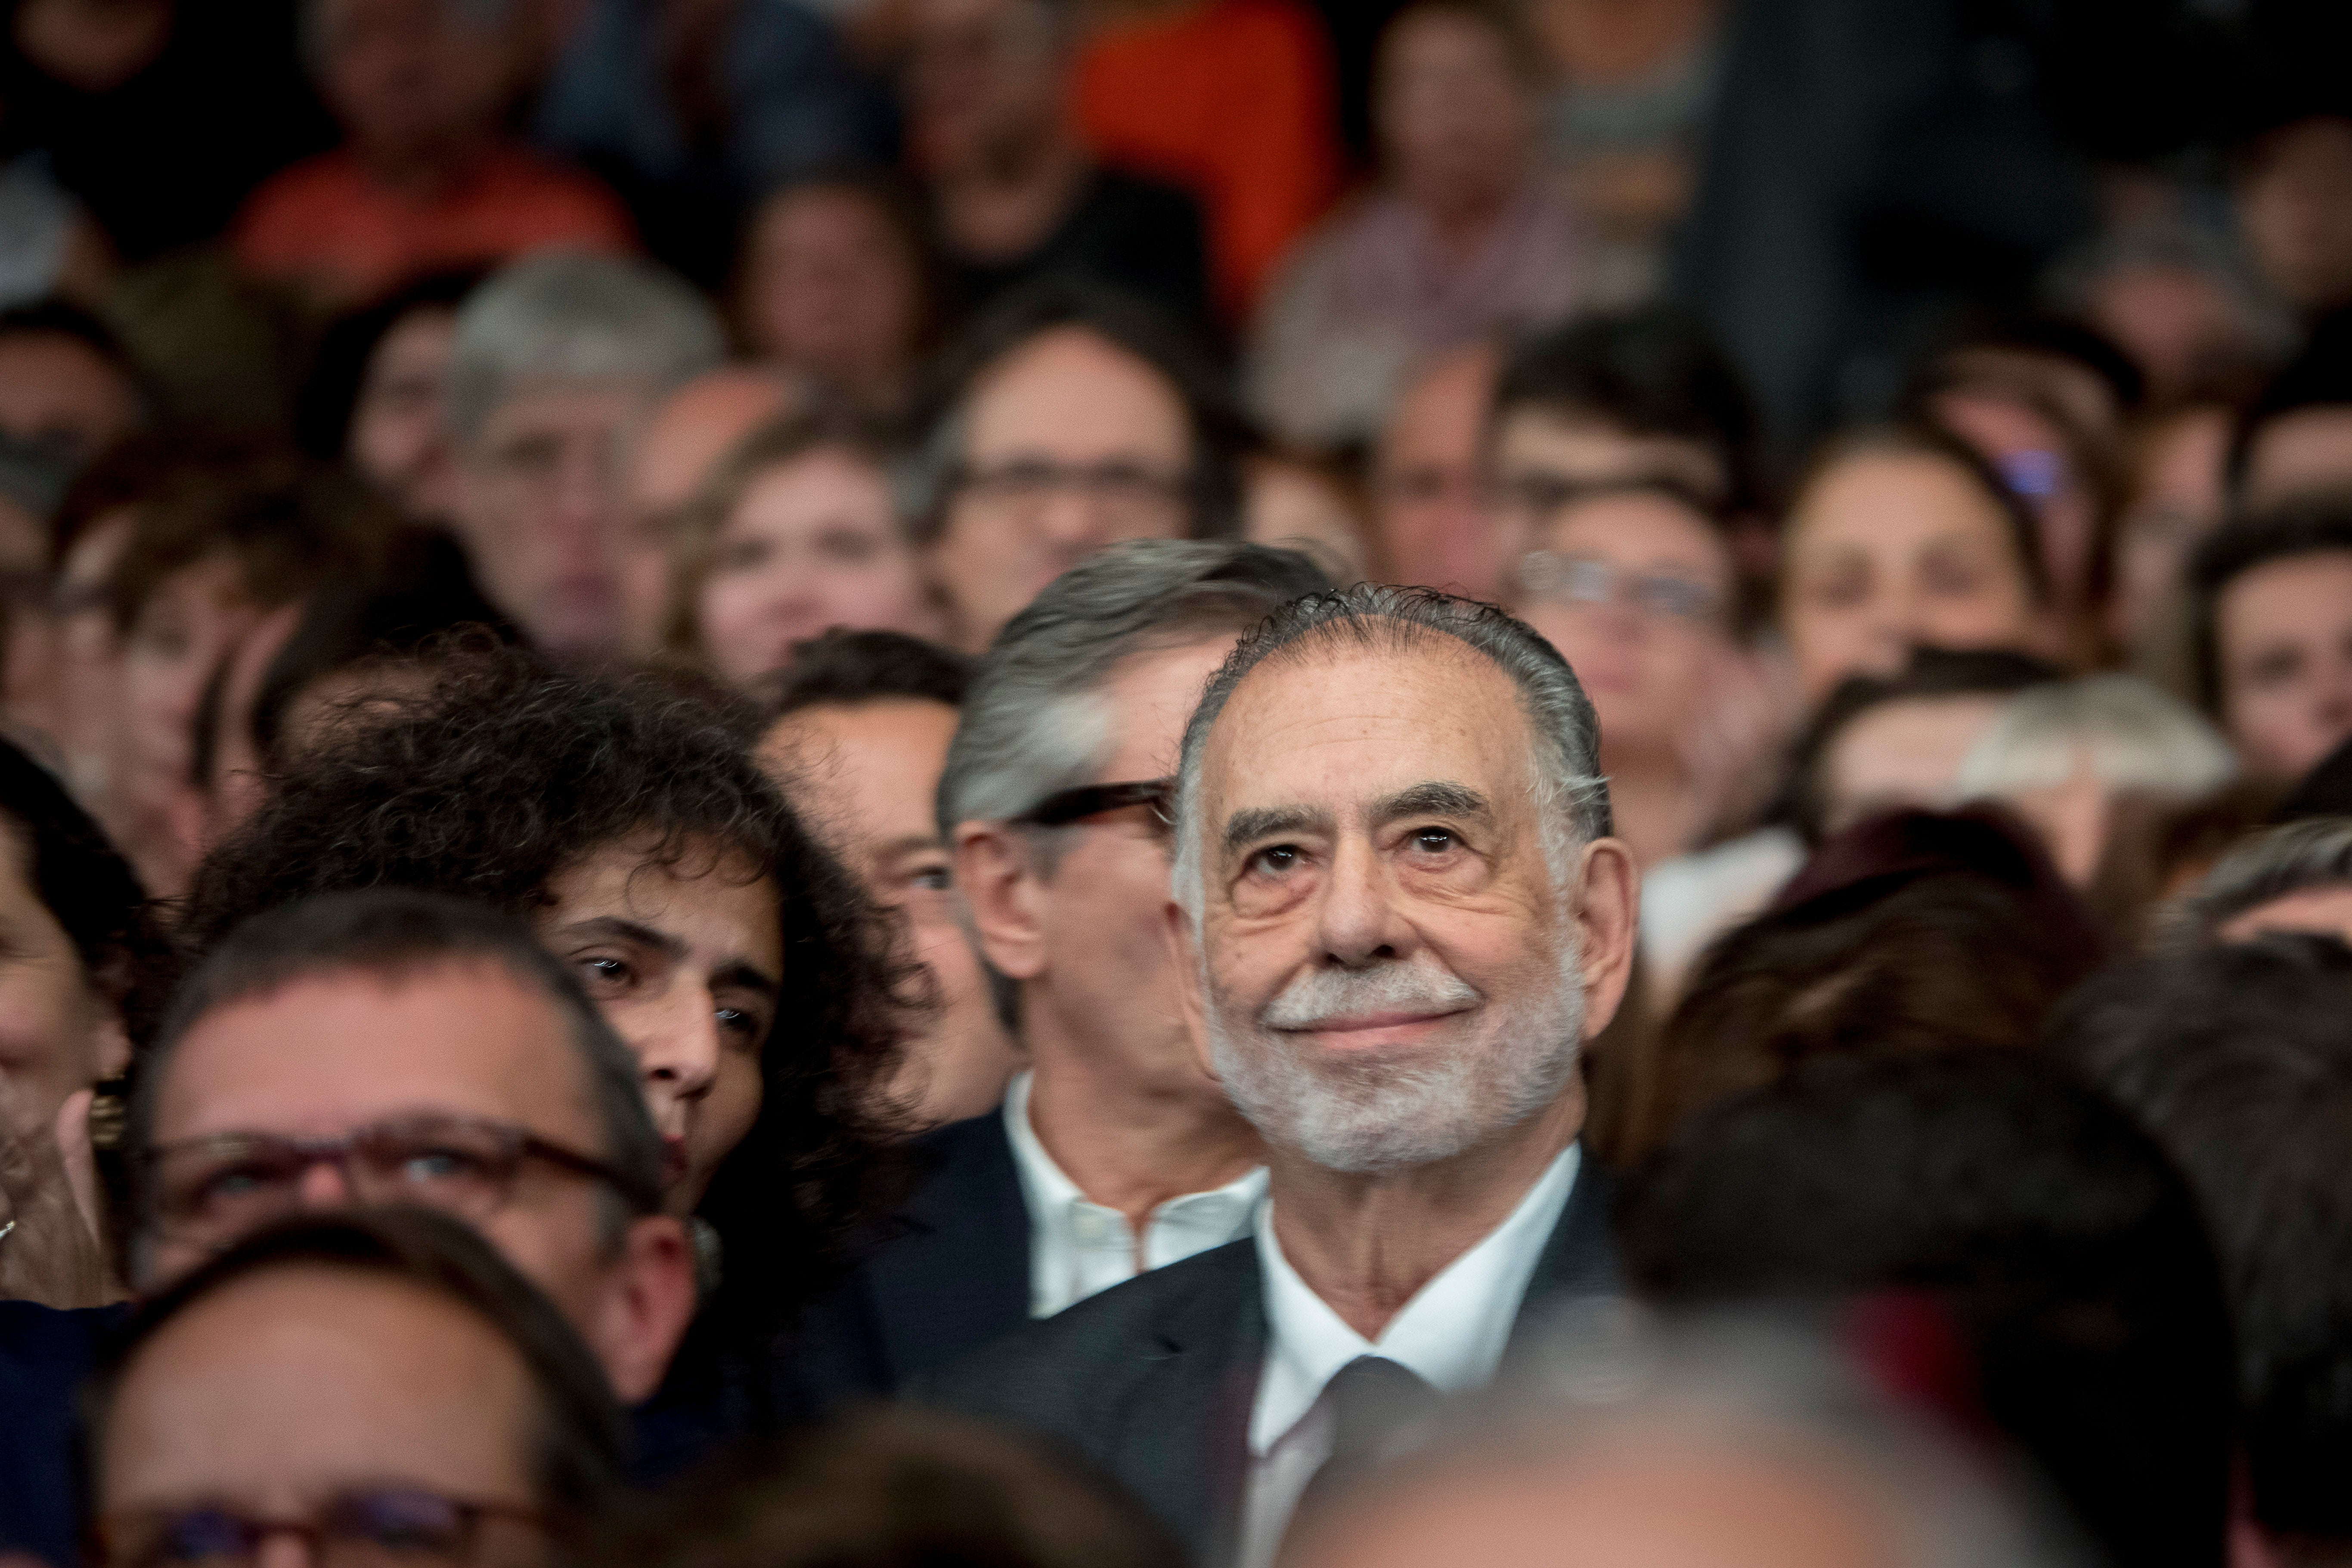 Francis Ford Coppola smiling serenely in a crowd in Lyon, France.